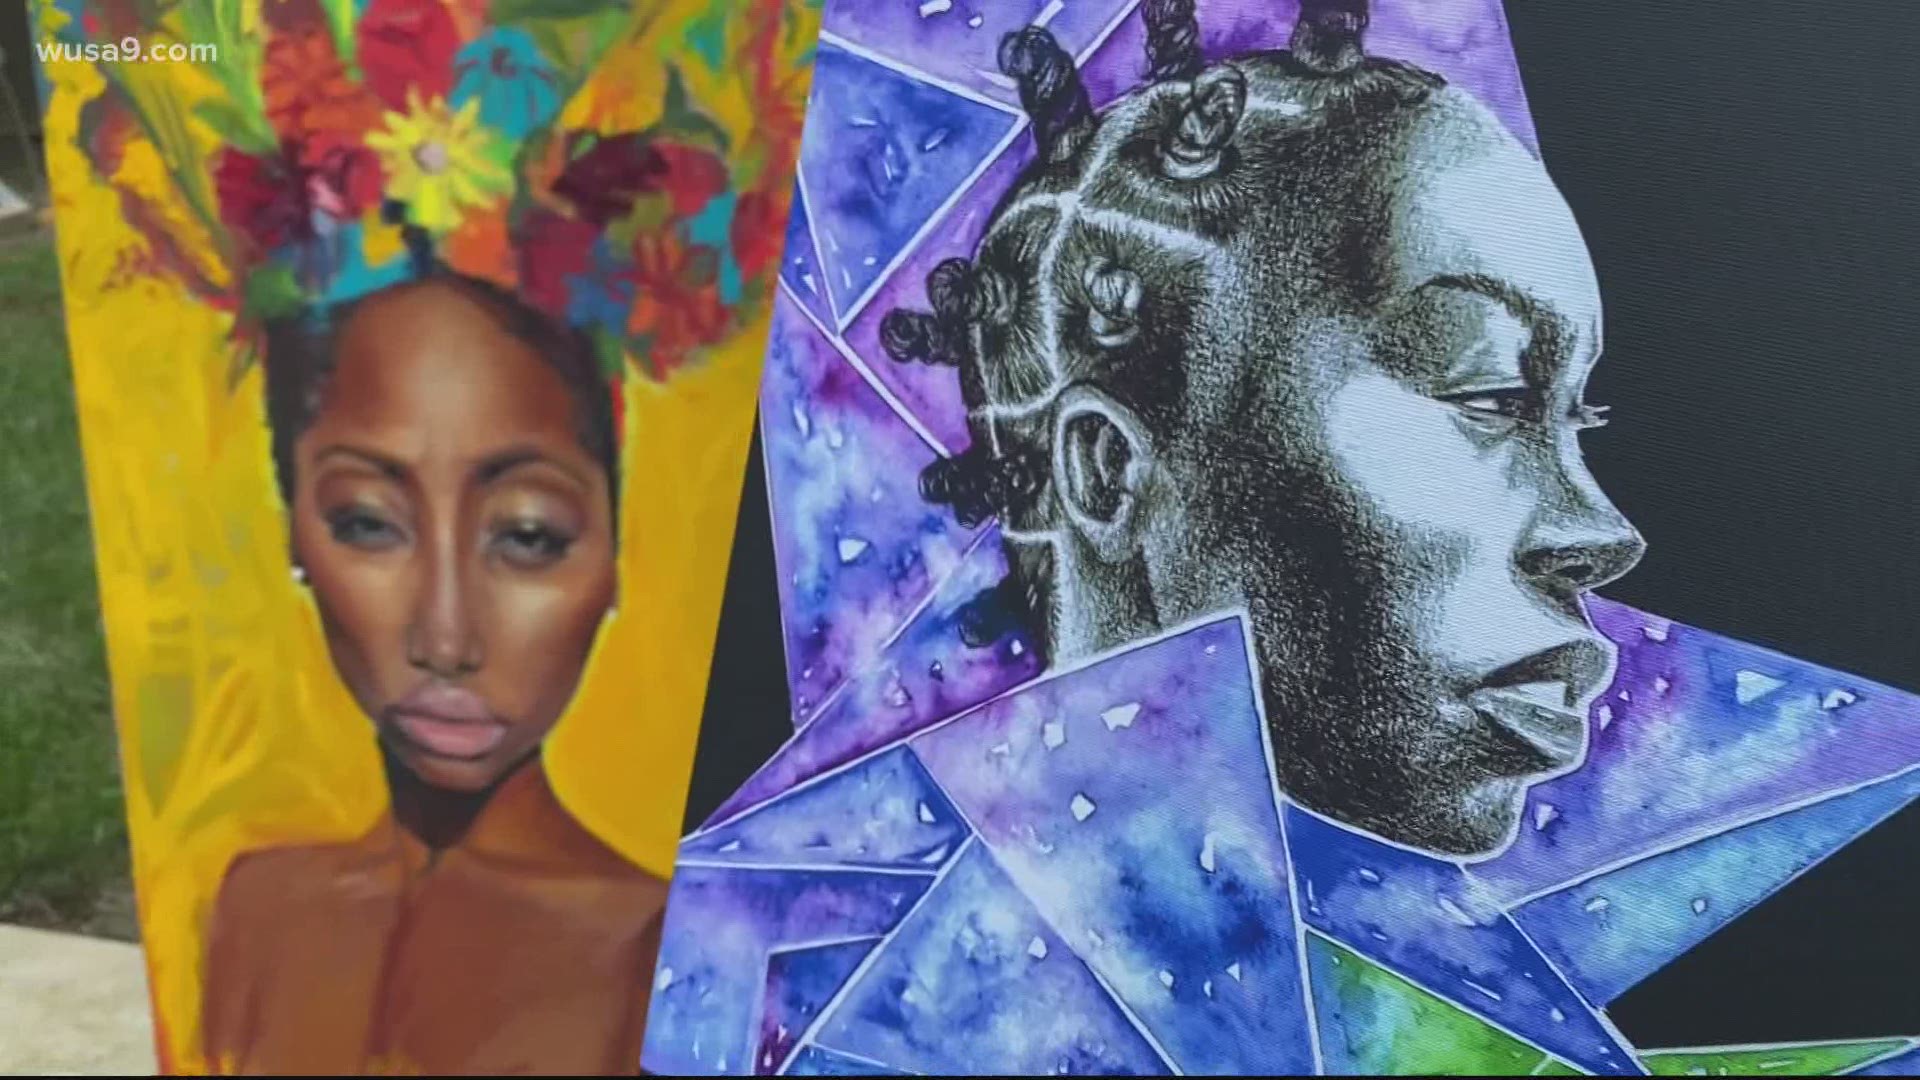 They joined with other artists to set up an affordable, virtual art show with proceeds going to organizations supporting the Black and brown communities.